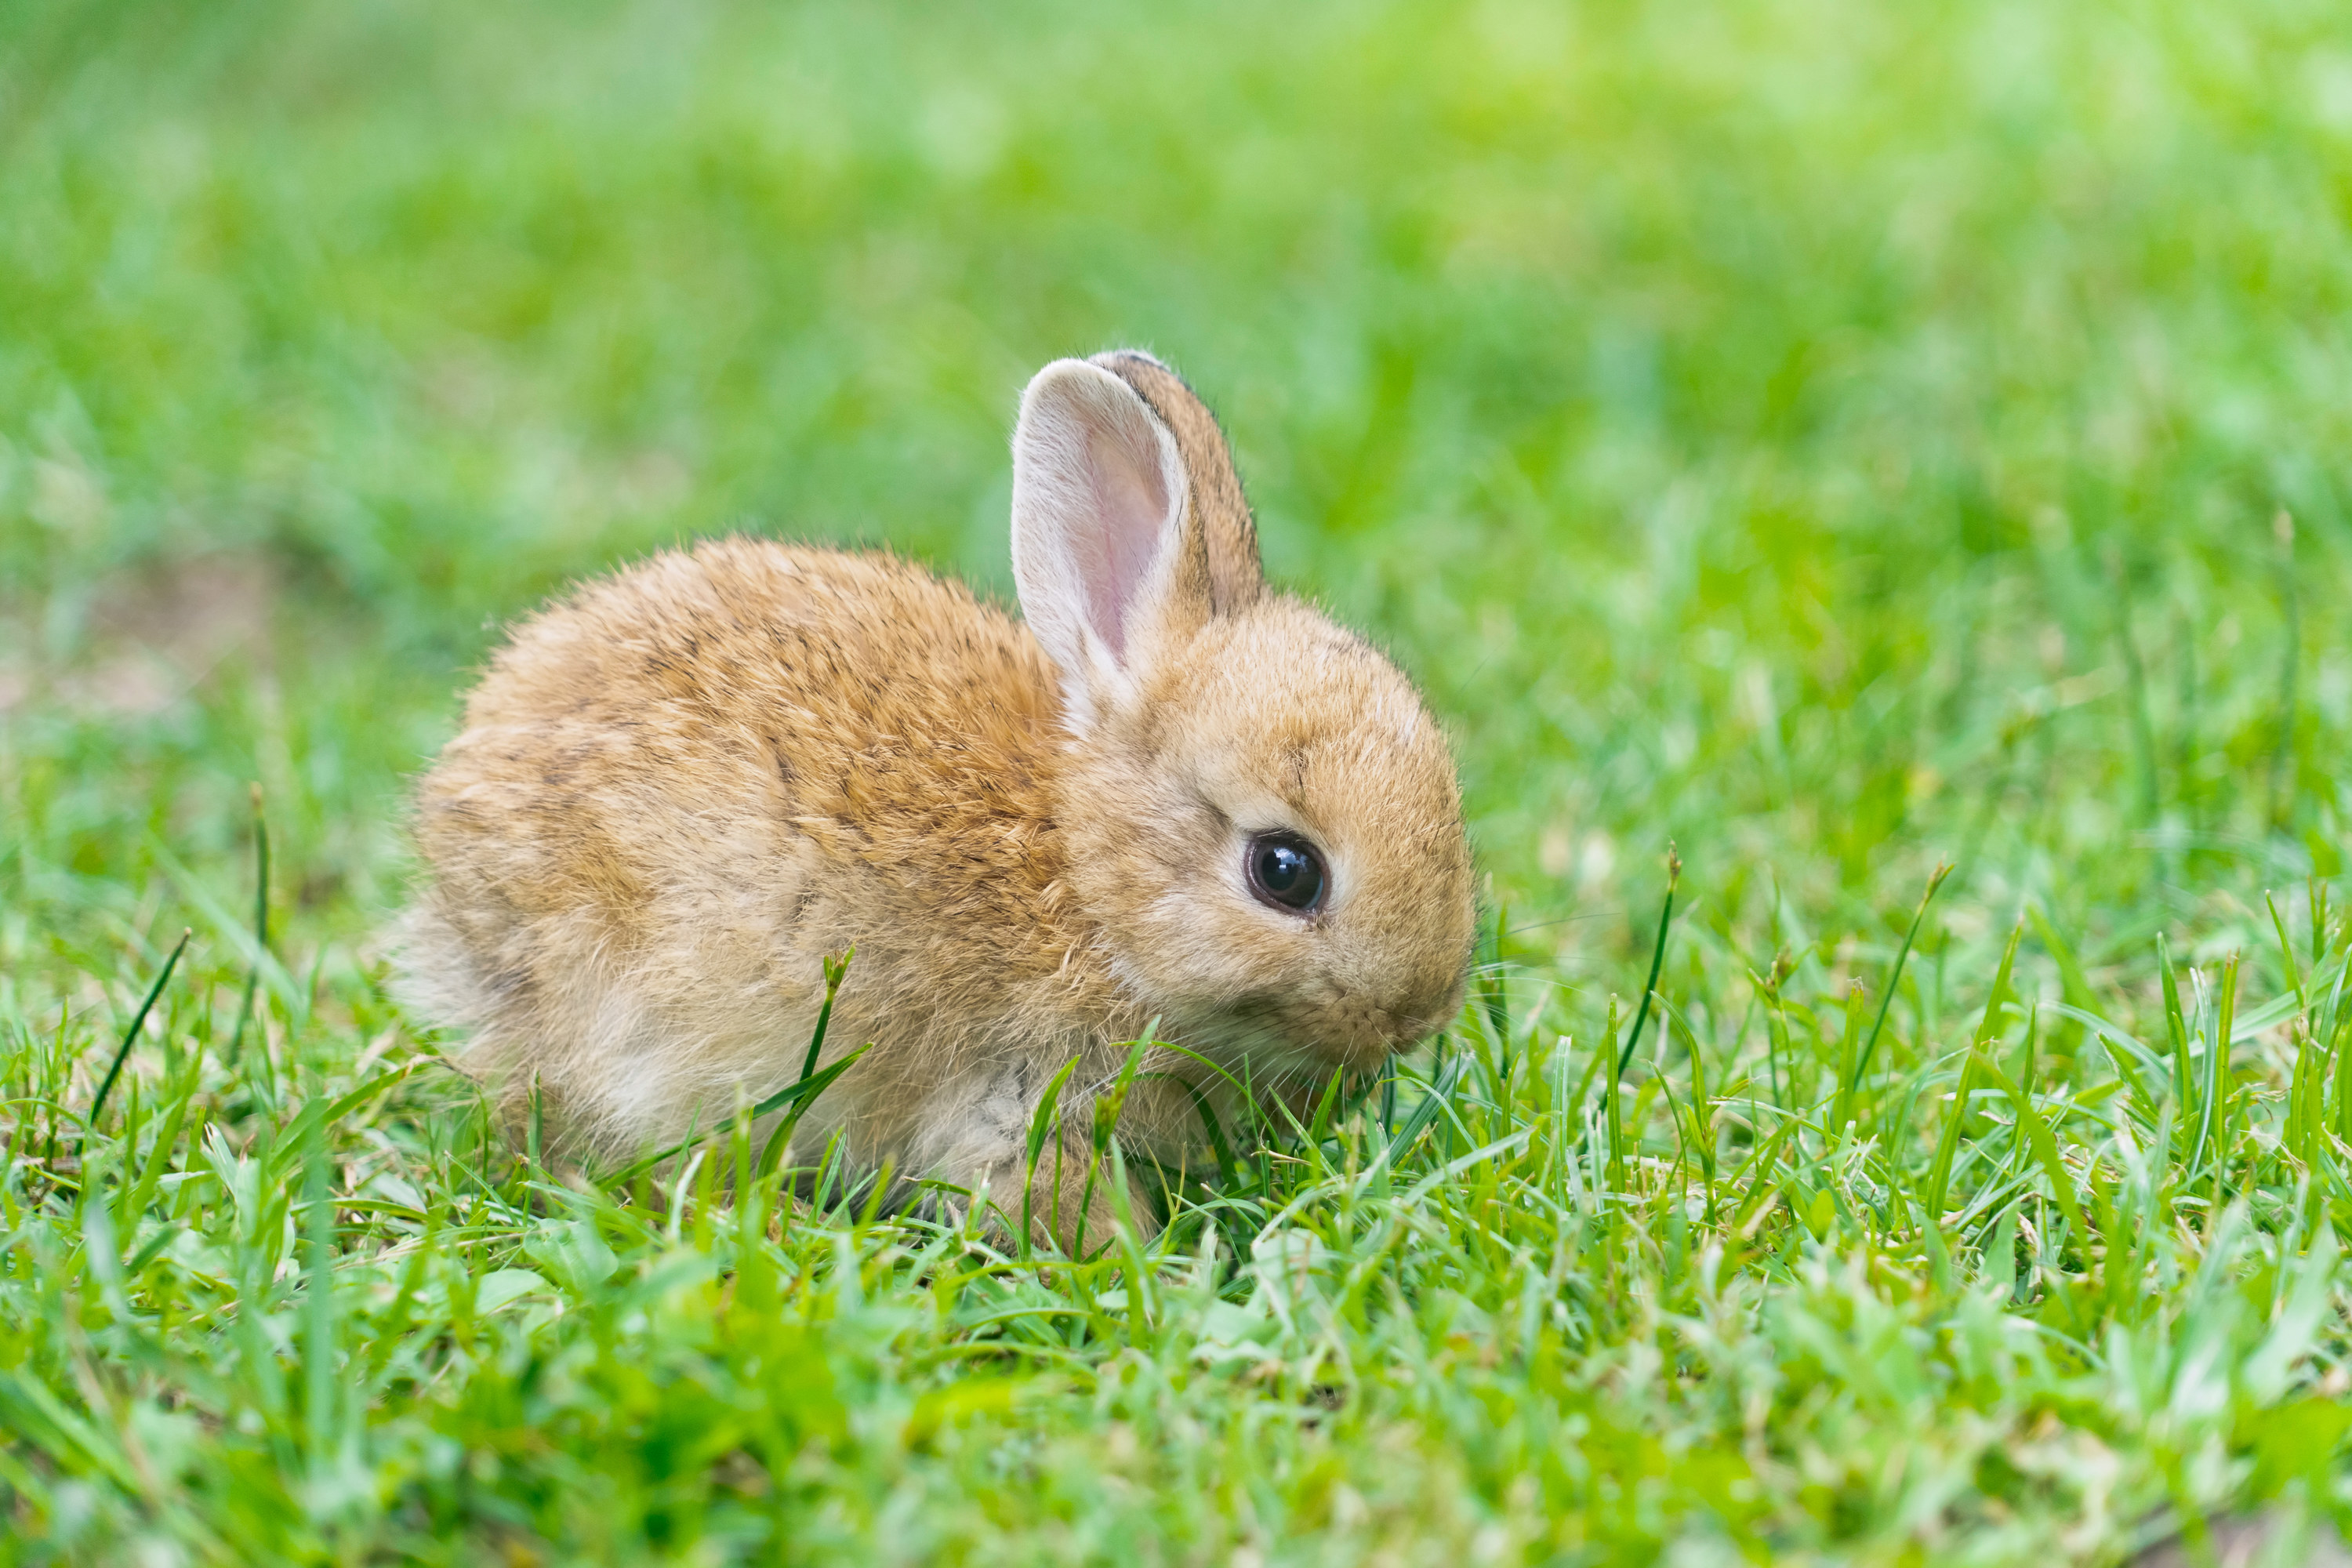 a baby bunny sits in grass